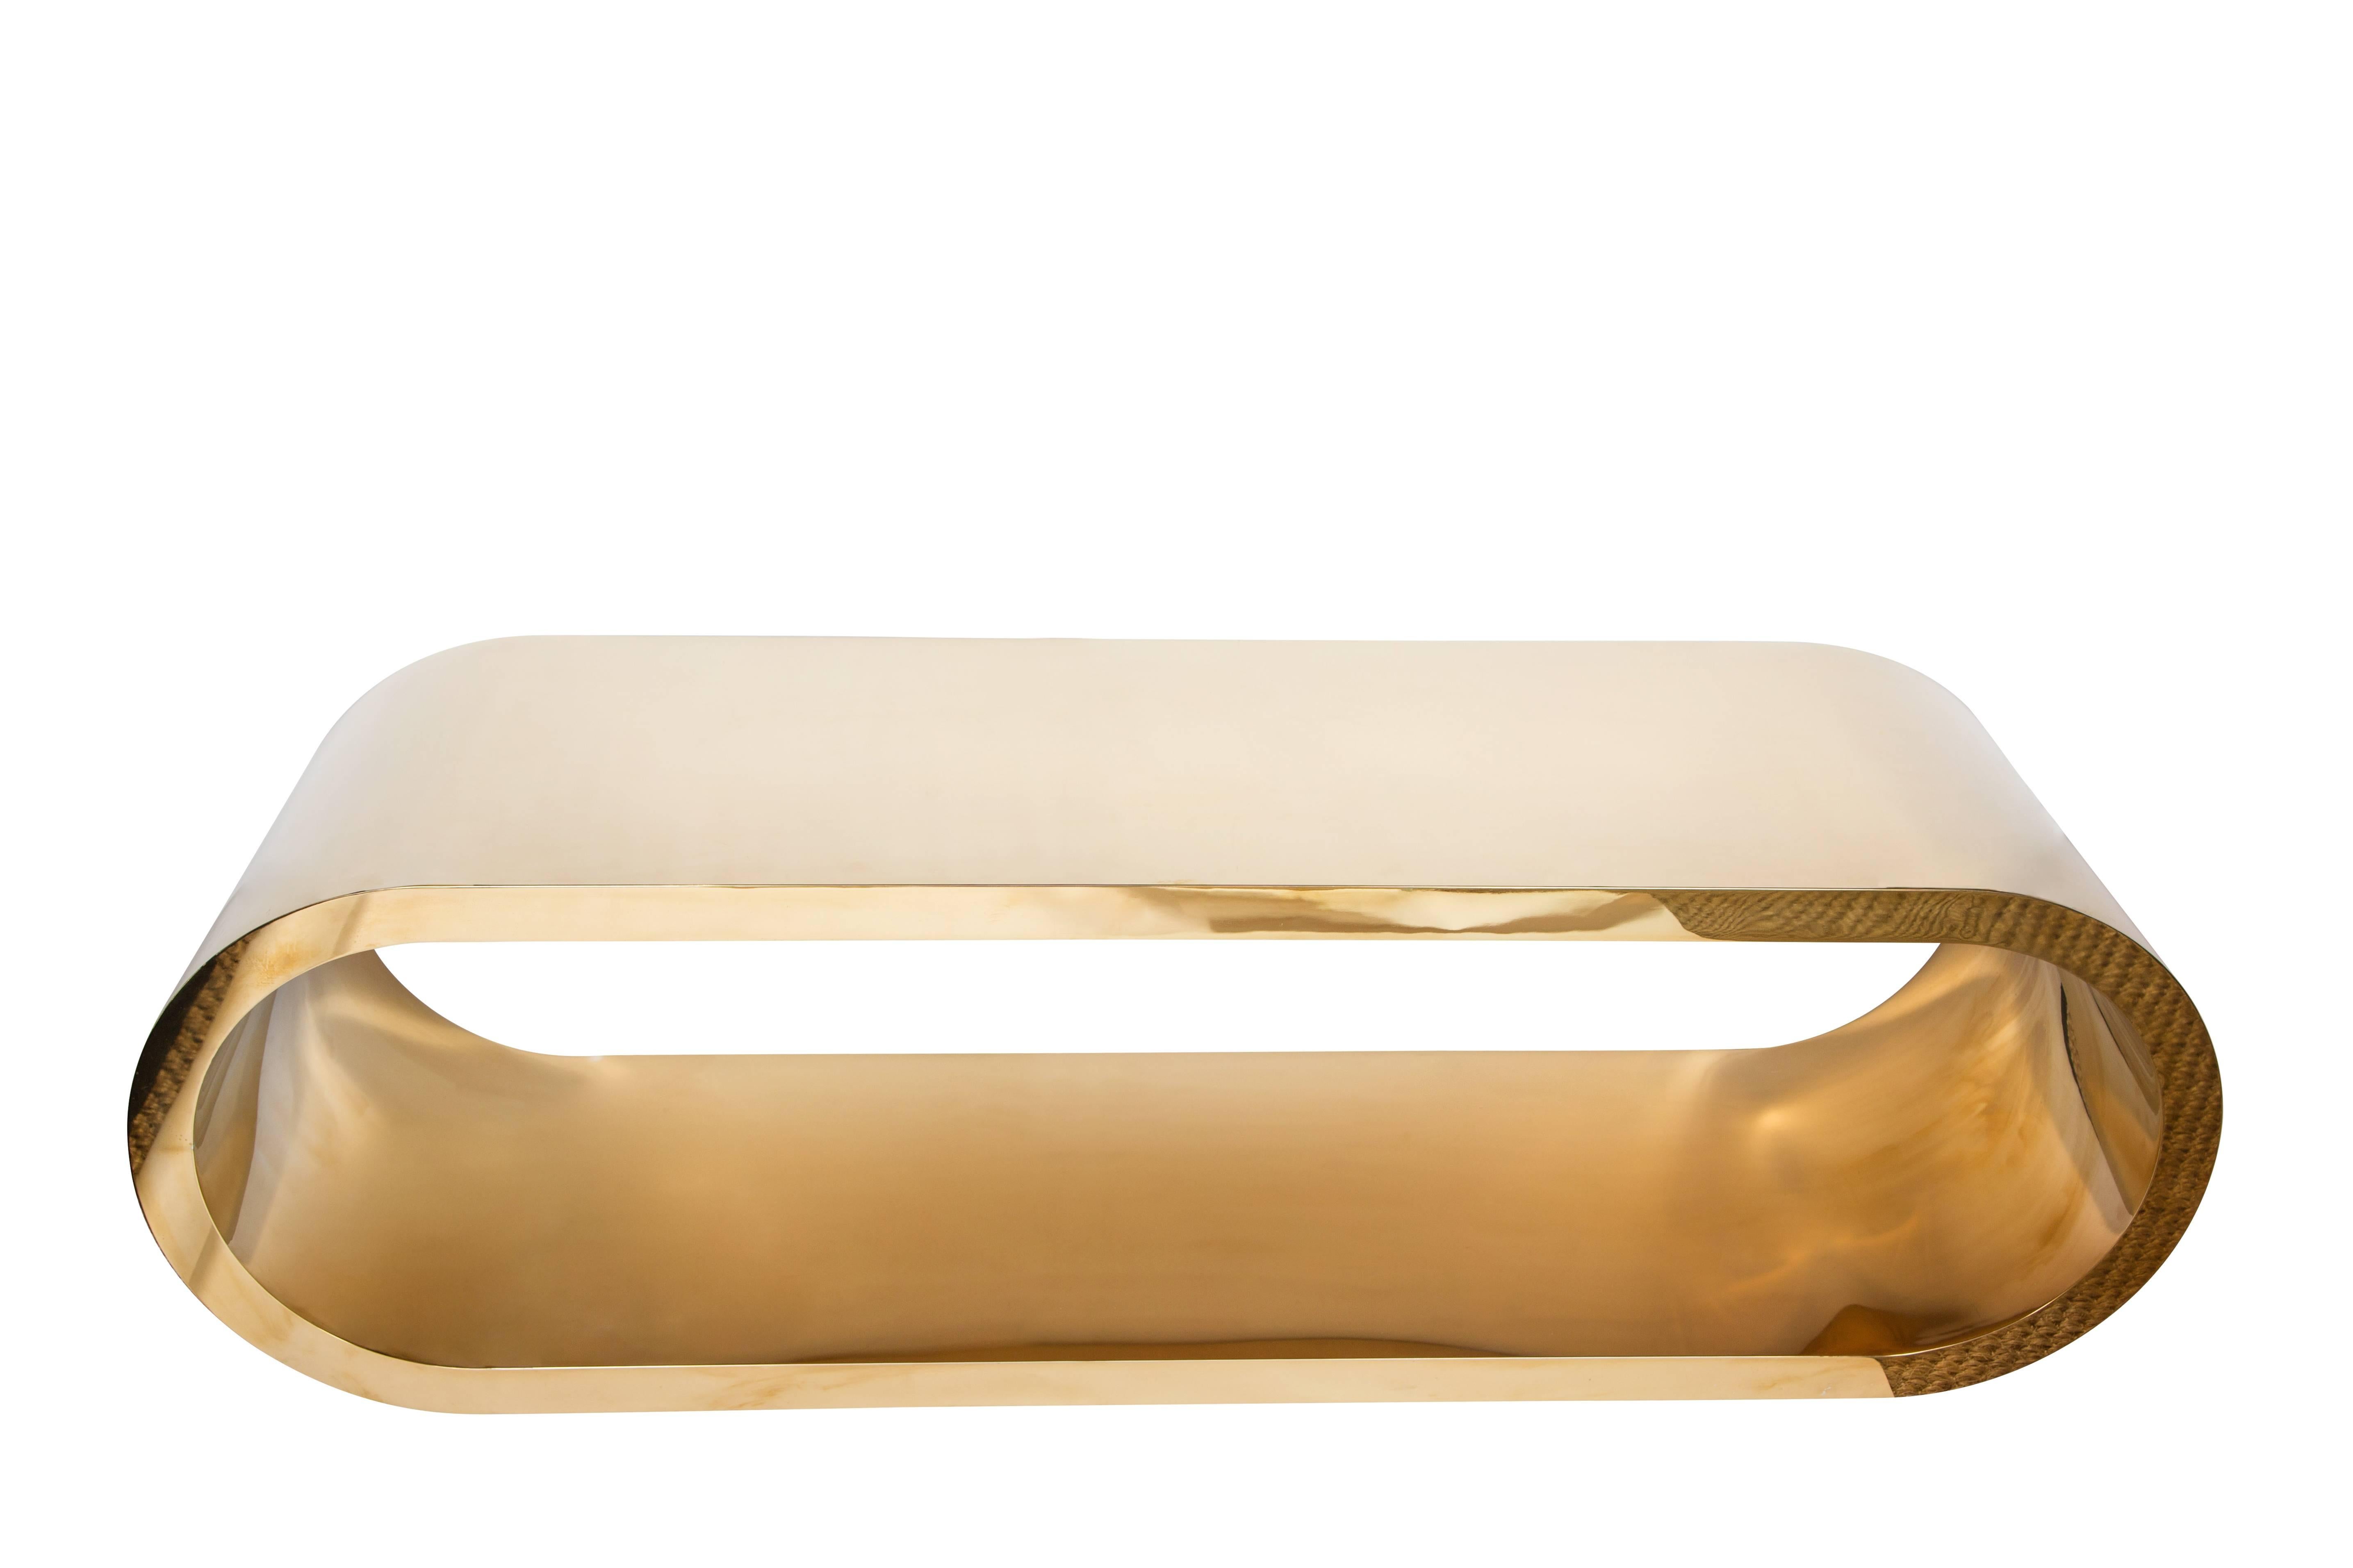 Sculptural coffee table in an elliptical shape clad in polished brass. Coffee table is reminiscent of the style of Pierre Cardin.  Late 1980s.